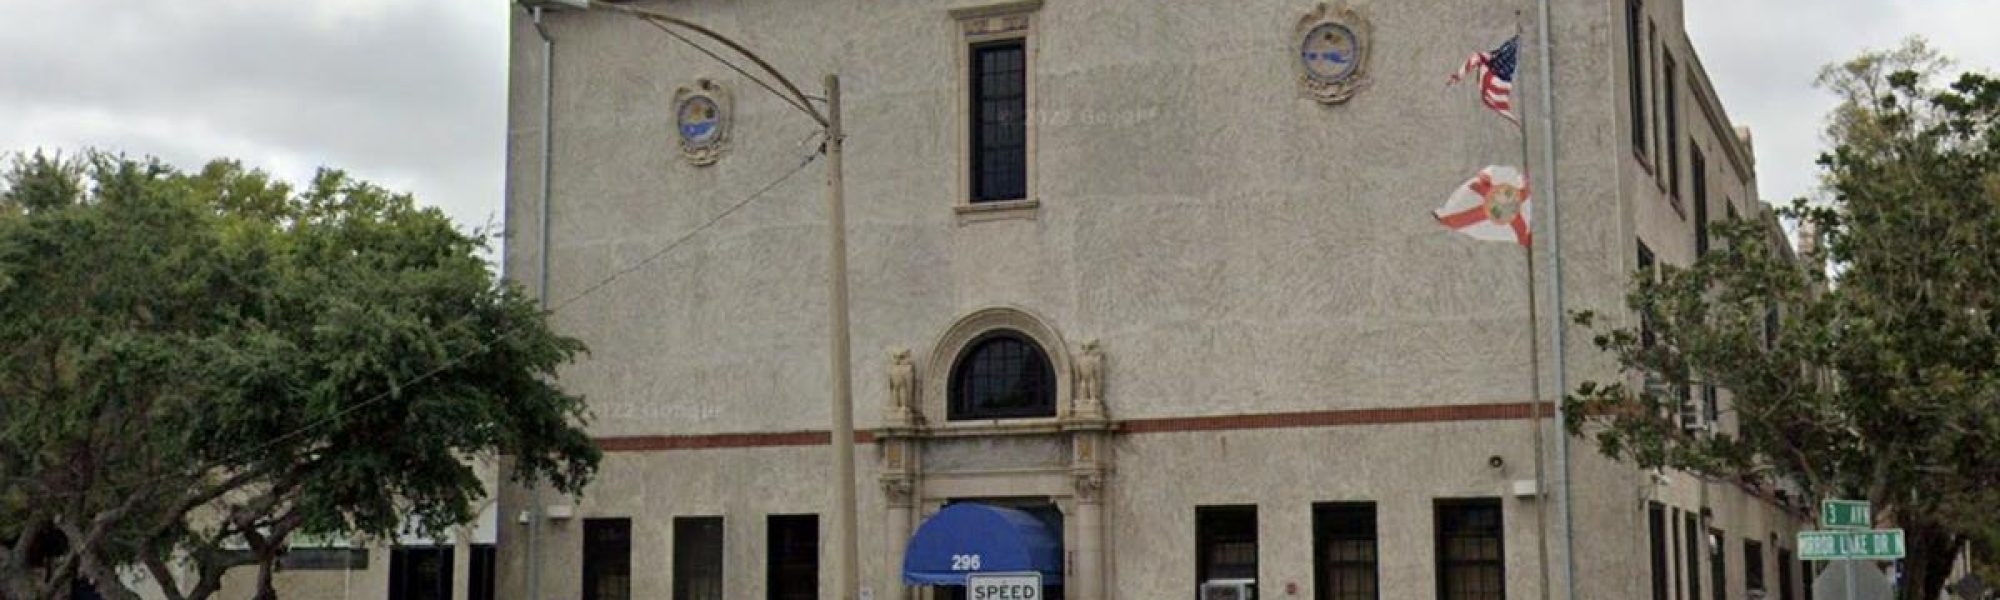 See the bids to turn a historic St. Pete building into teacher housing